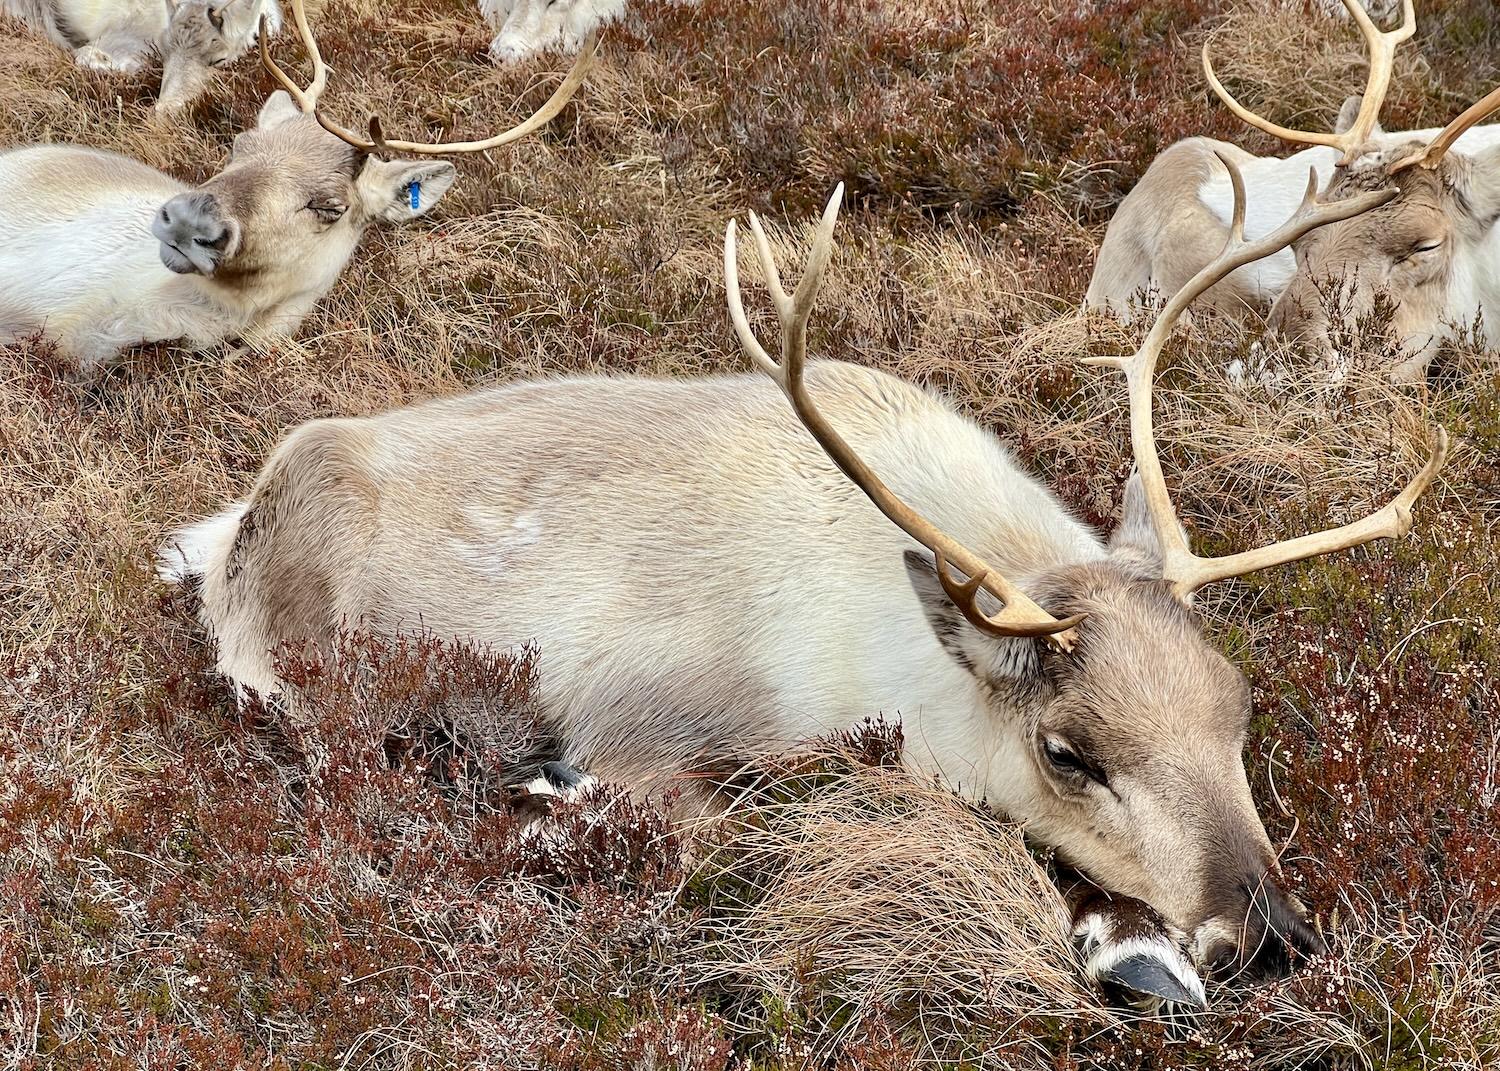 A reindeer named Pip rests on her hooves, while another named Trilby (back left) dozes on her side.